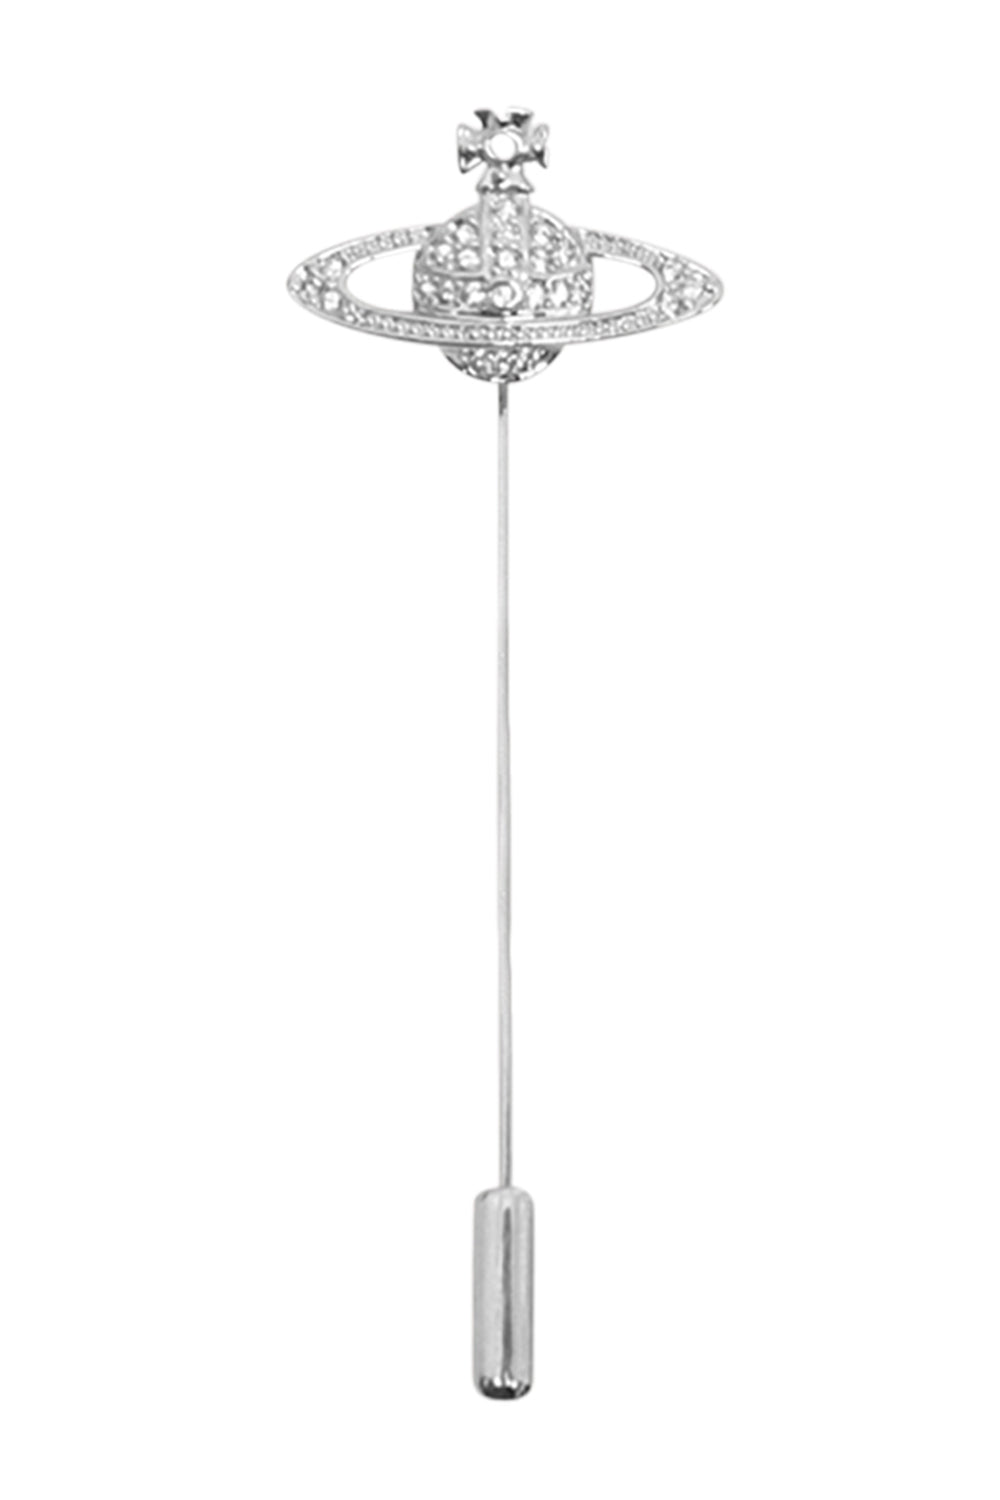 VIVIENNE WESTWOOD Unclassified SILVER MINI BAS RELIEF TIE PIN | SILVER/CRYSTAL